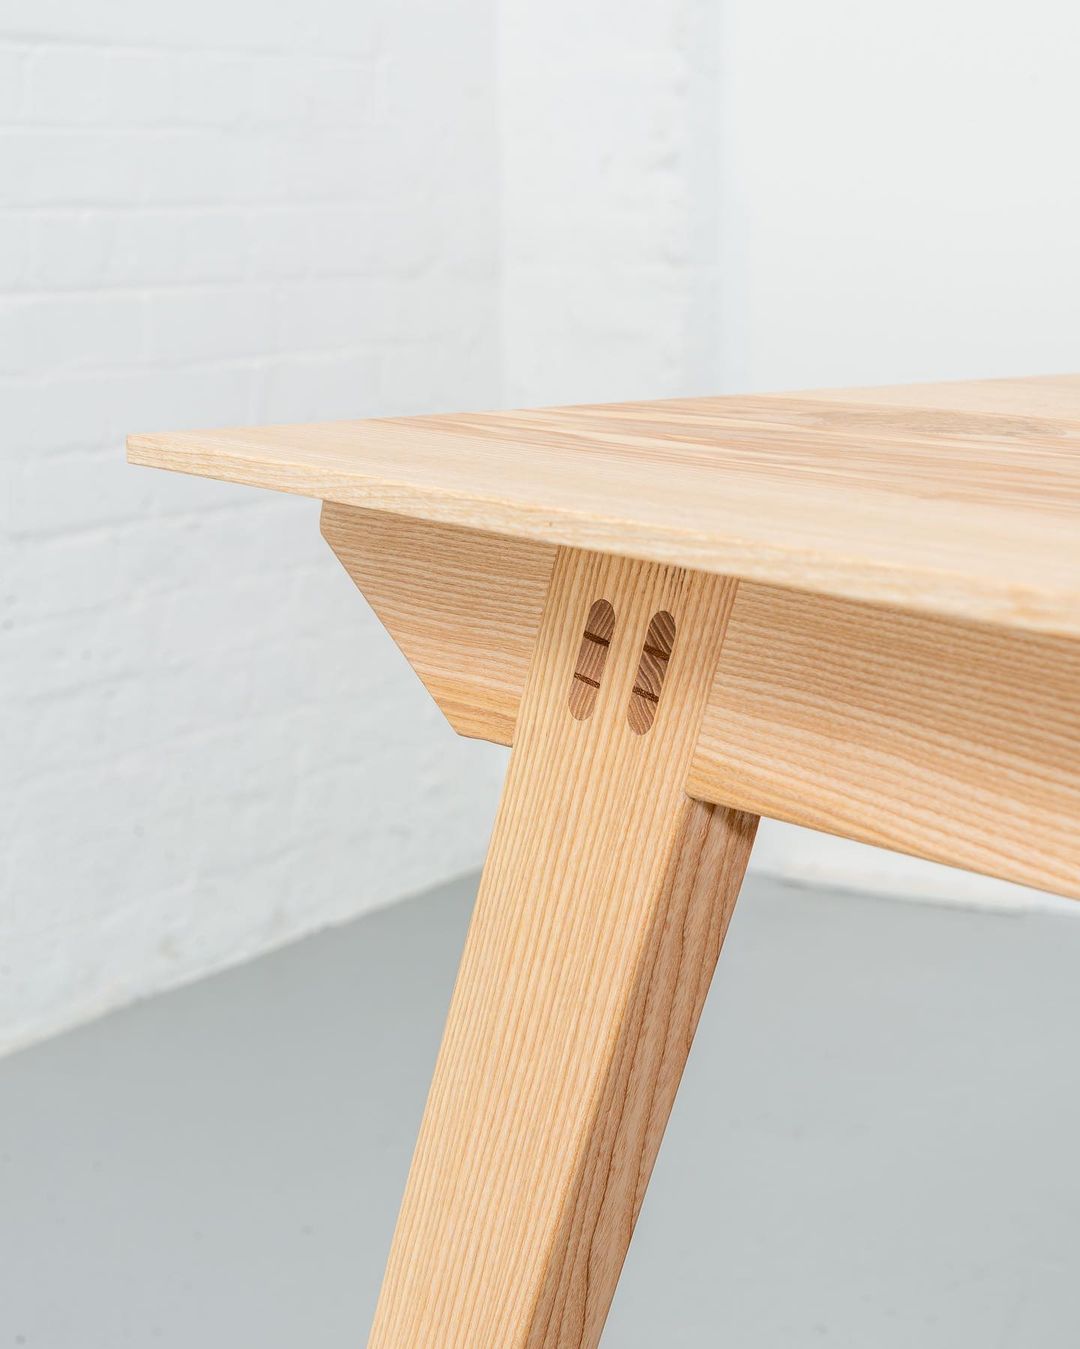 a-little-olive-ash-table-action.-its-always-good-to-revisit-previous-designs-it-gives-us-great-insig-2